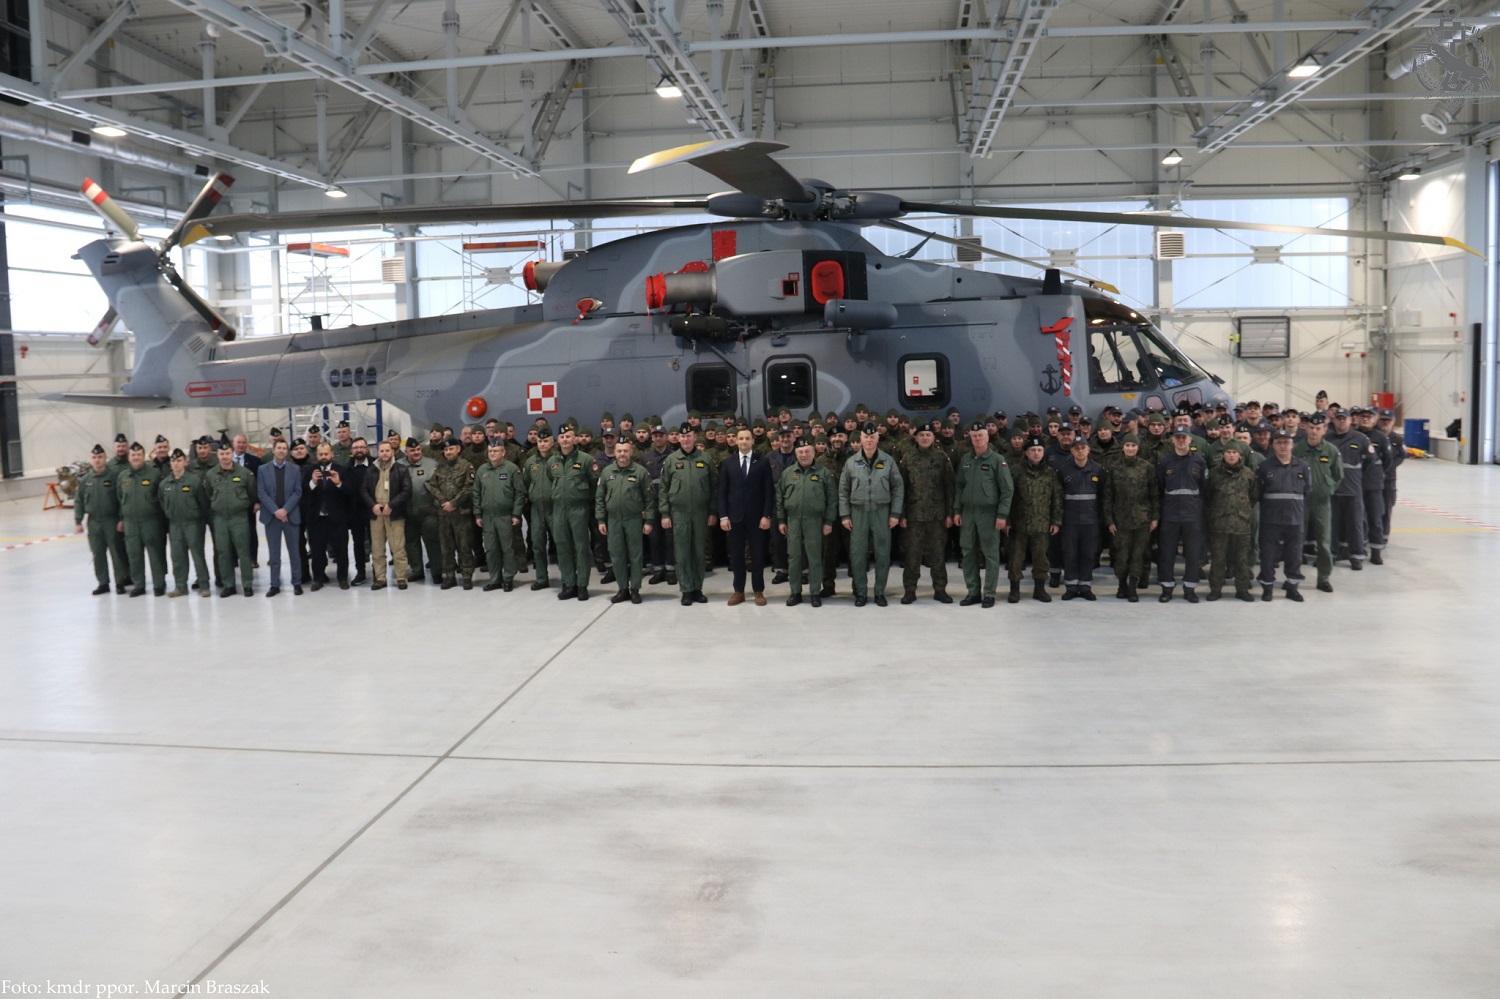 The Polish Armament Agency on Friday took delivery of the first of four Leonardo AW101 naval helicopters that will be operated by the Polish navy for ASW and Combat SAR missions.